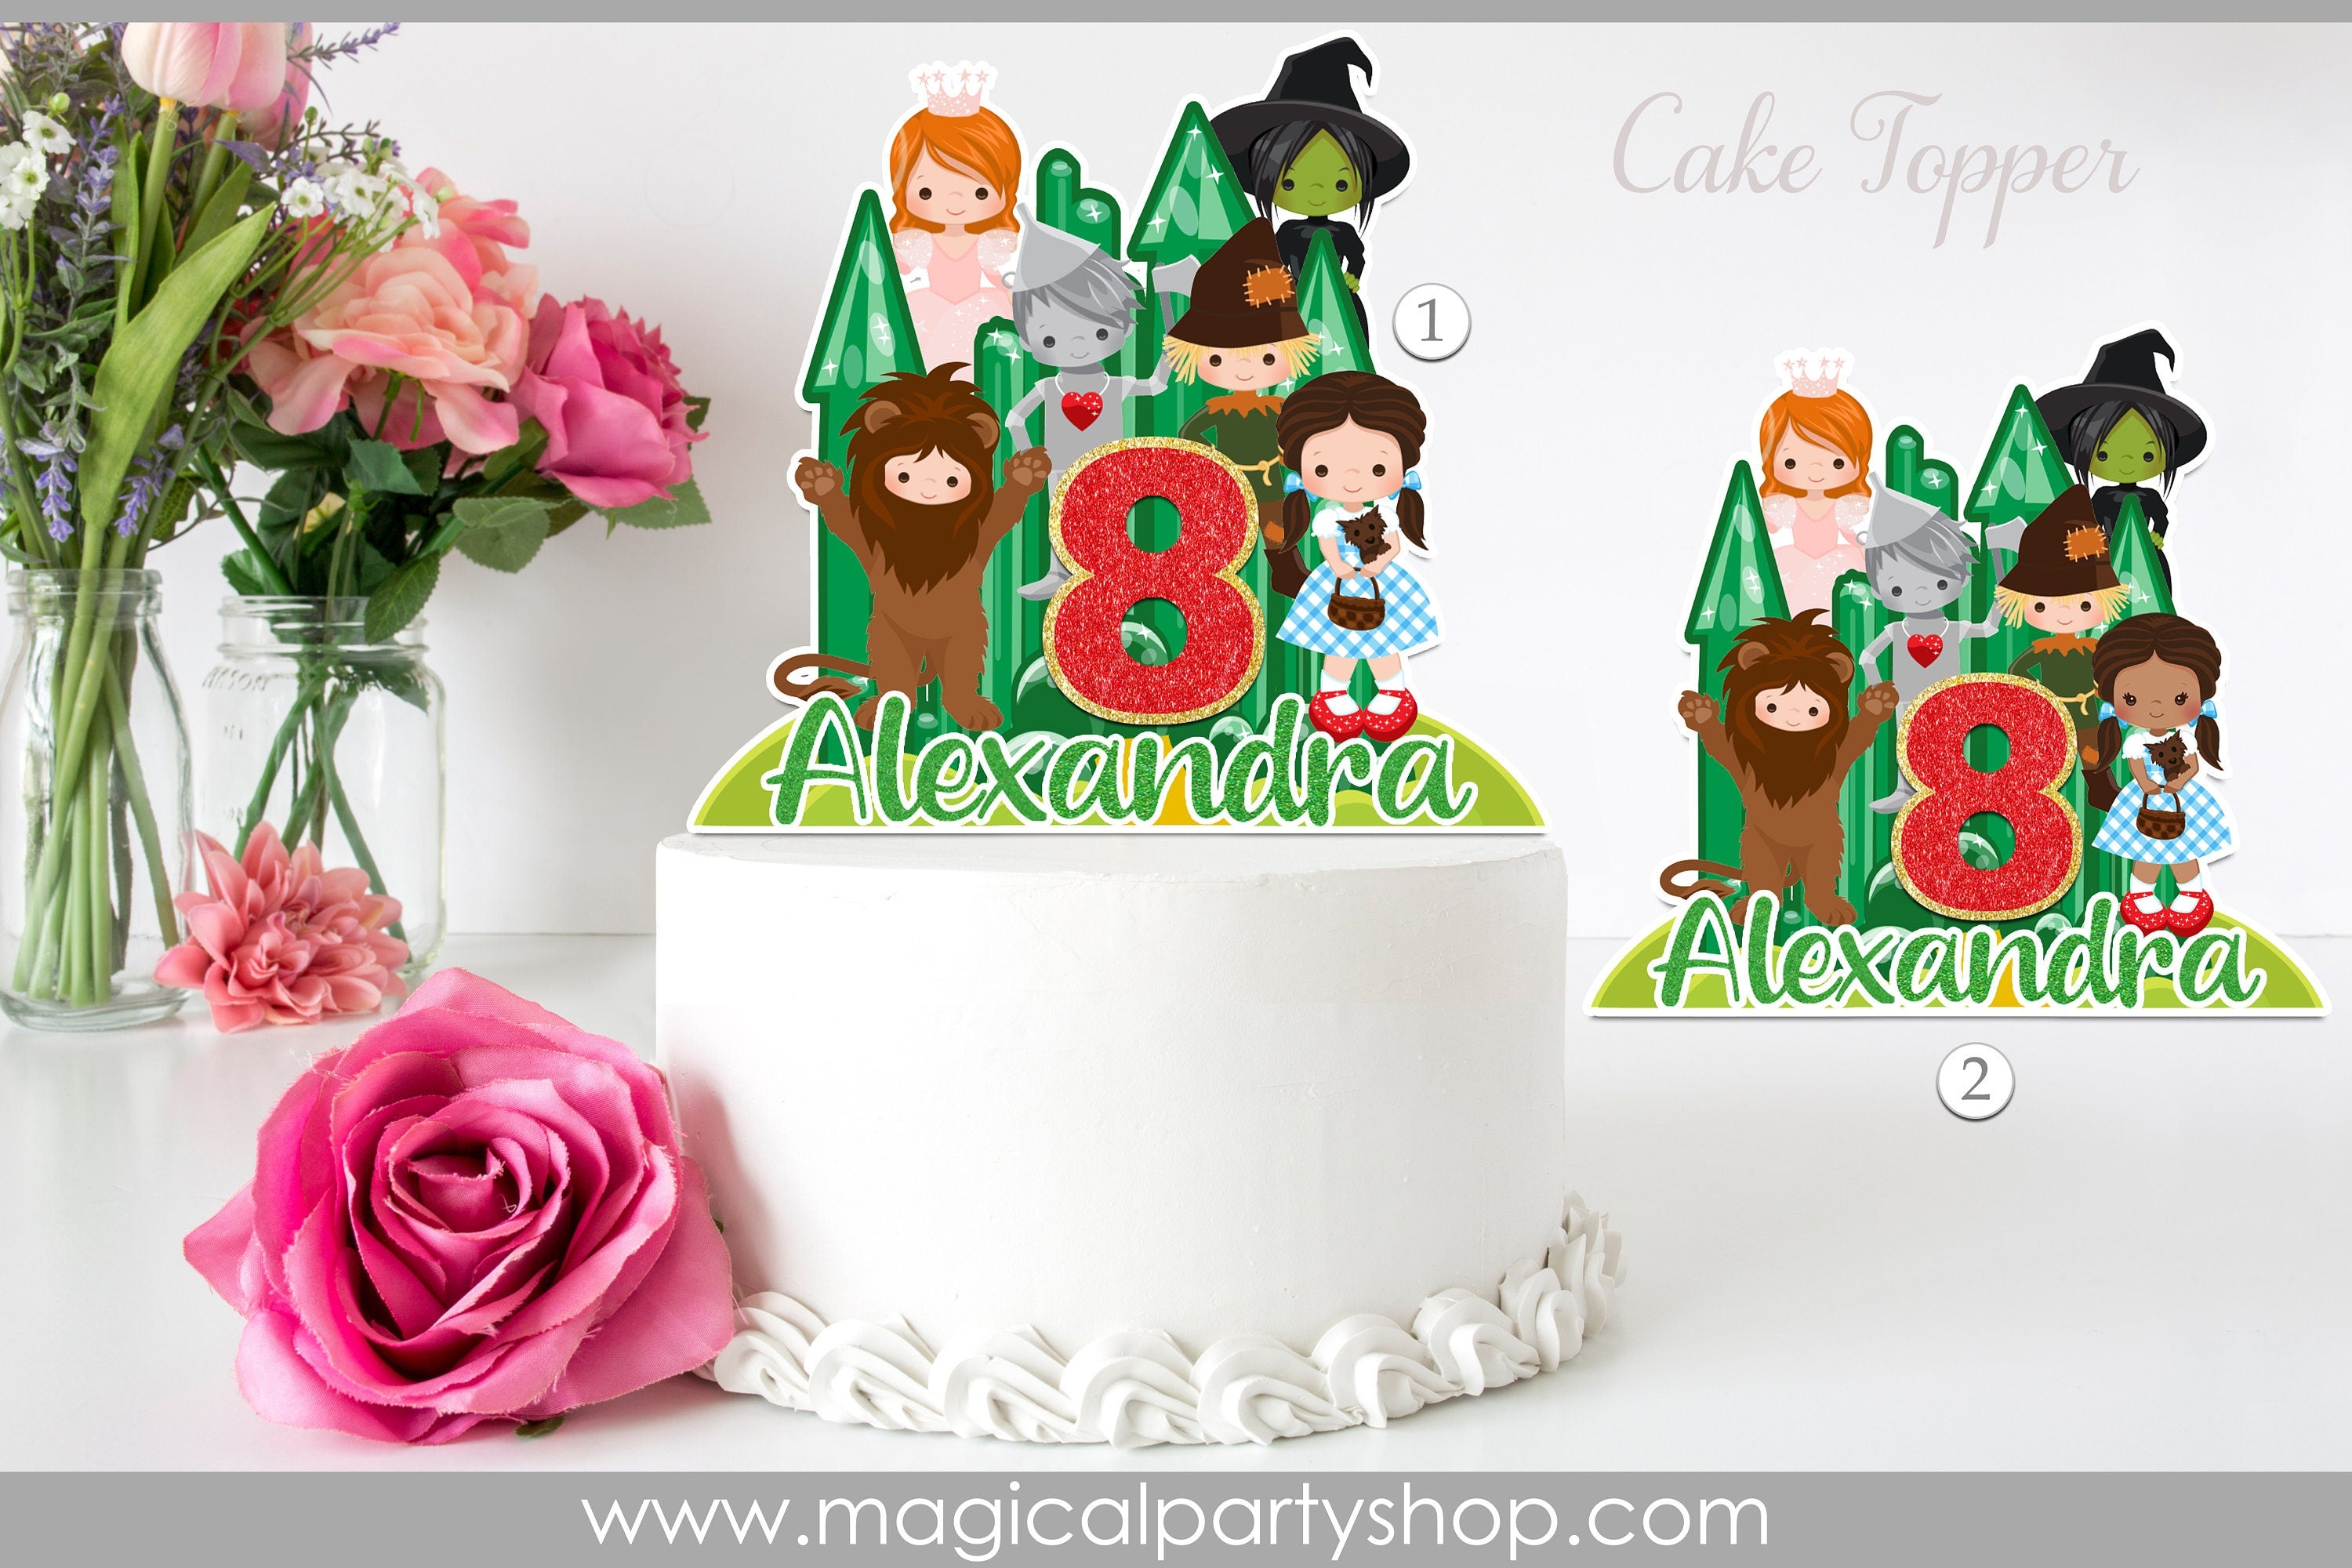 Wizard Cake topper, Wizard cake topper set, Wizard party